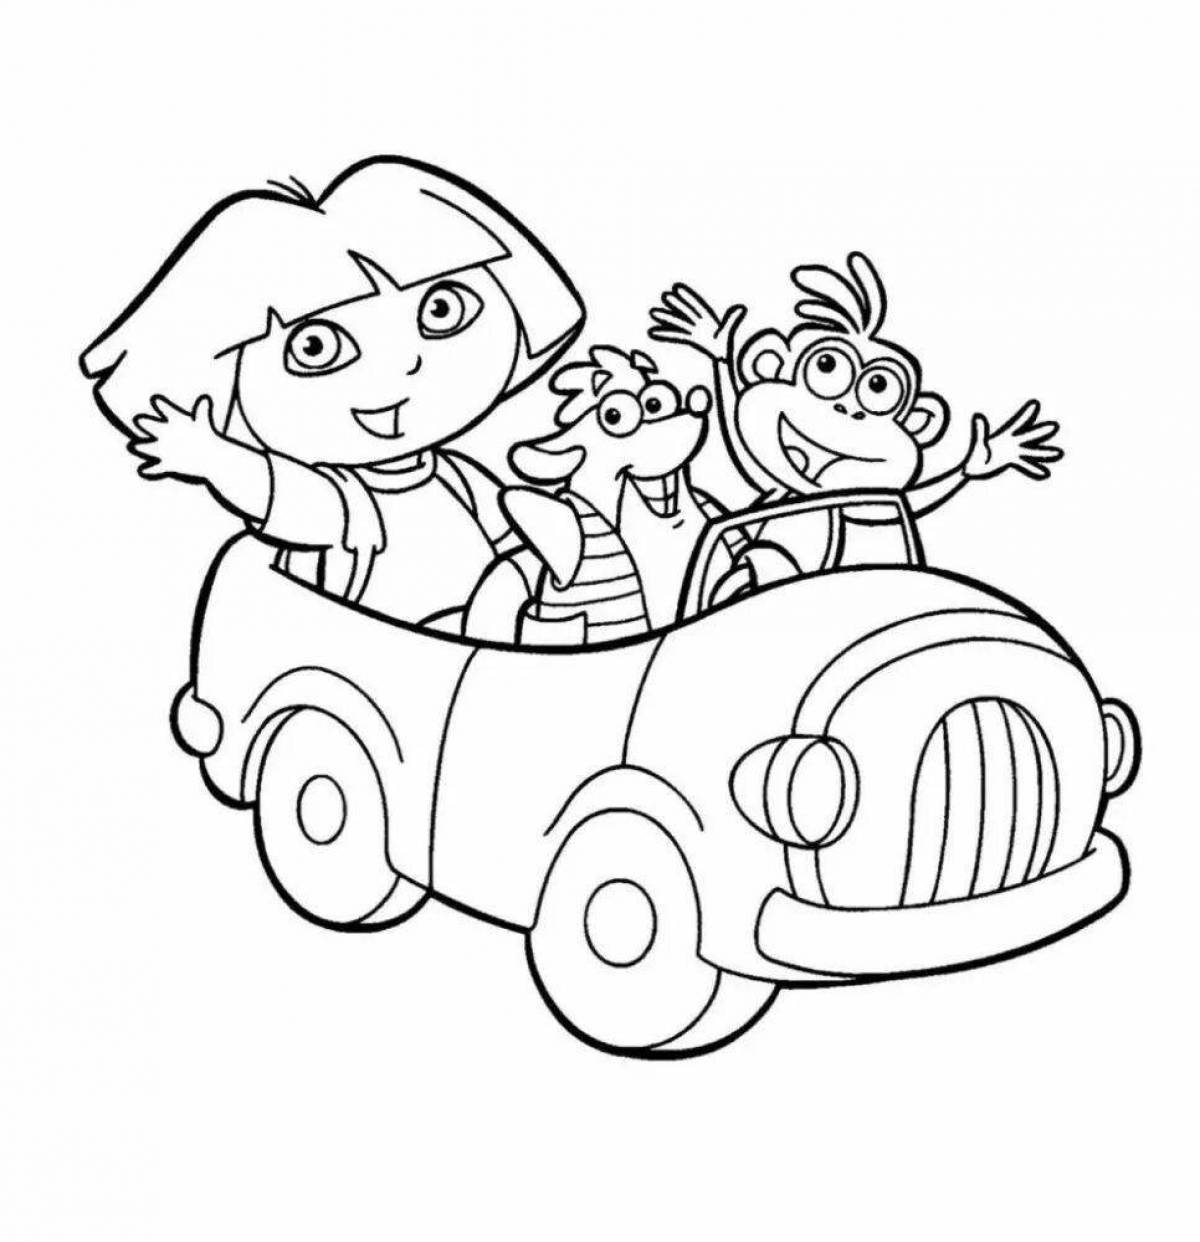 Unique coloring page from March